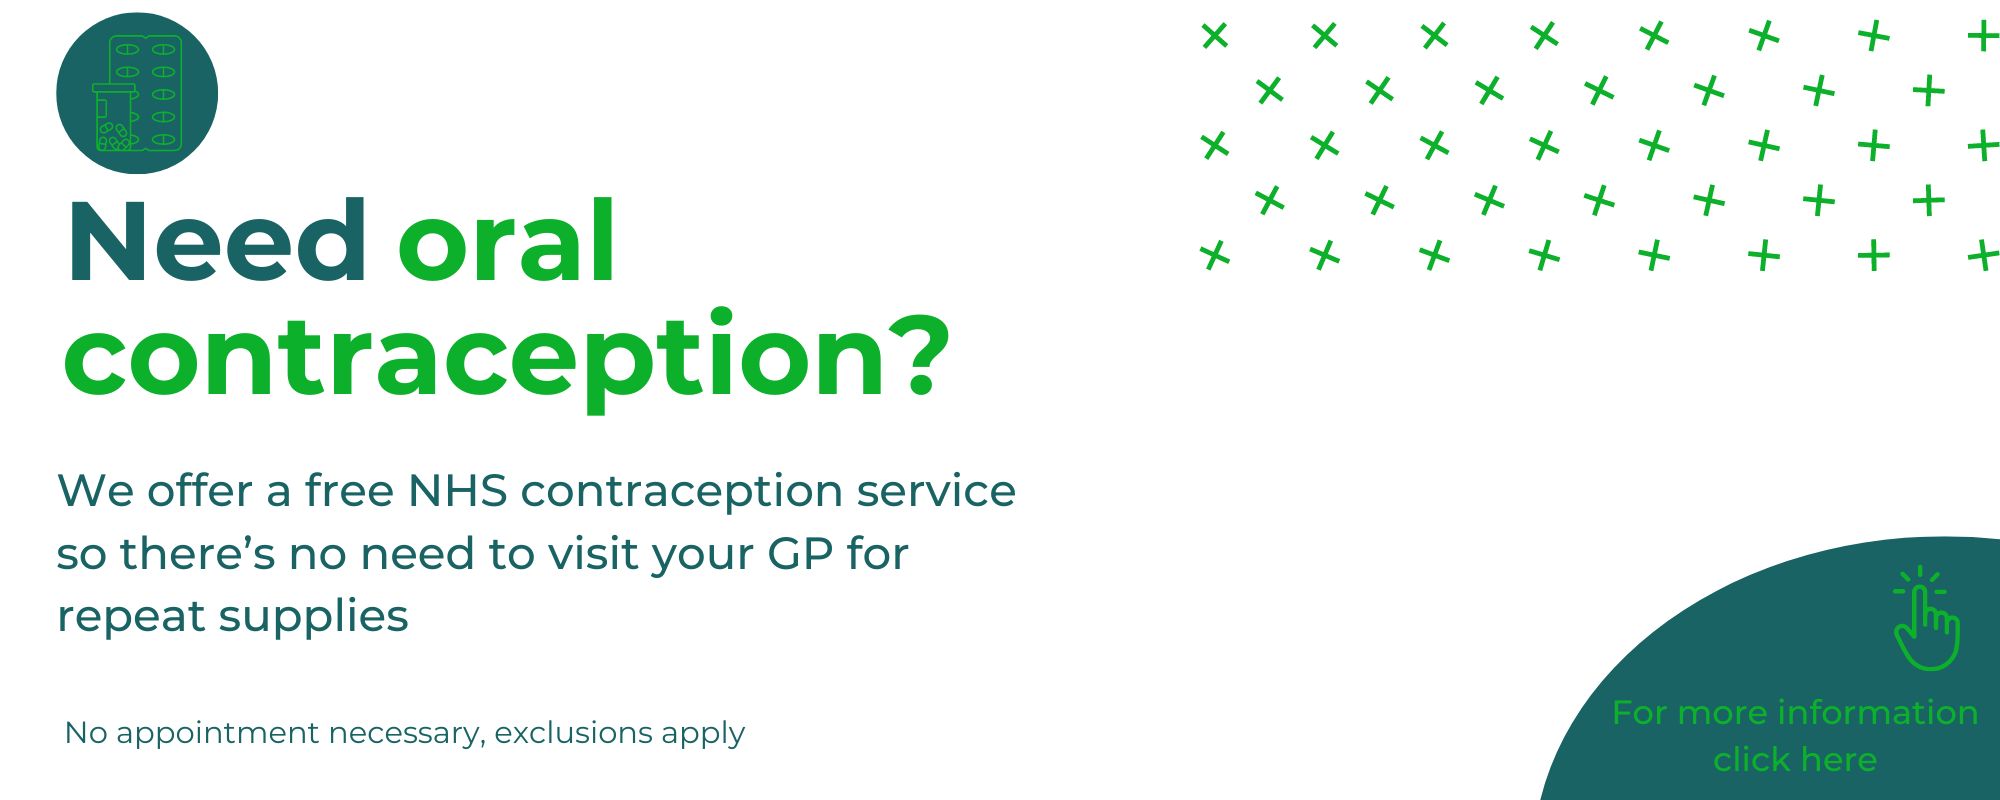 Pharmacy contraception service click here for more information